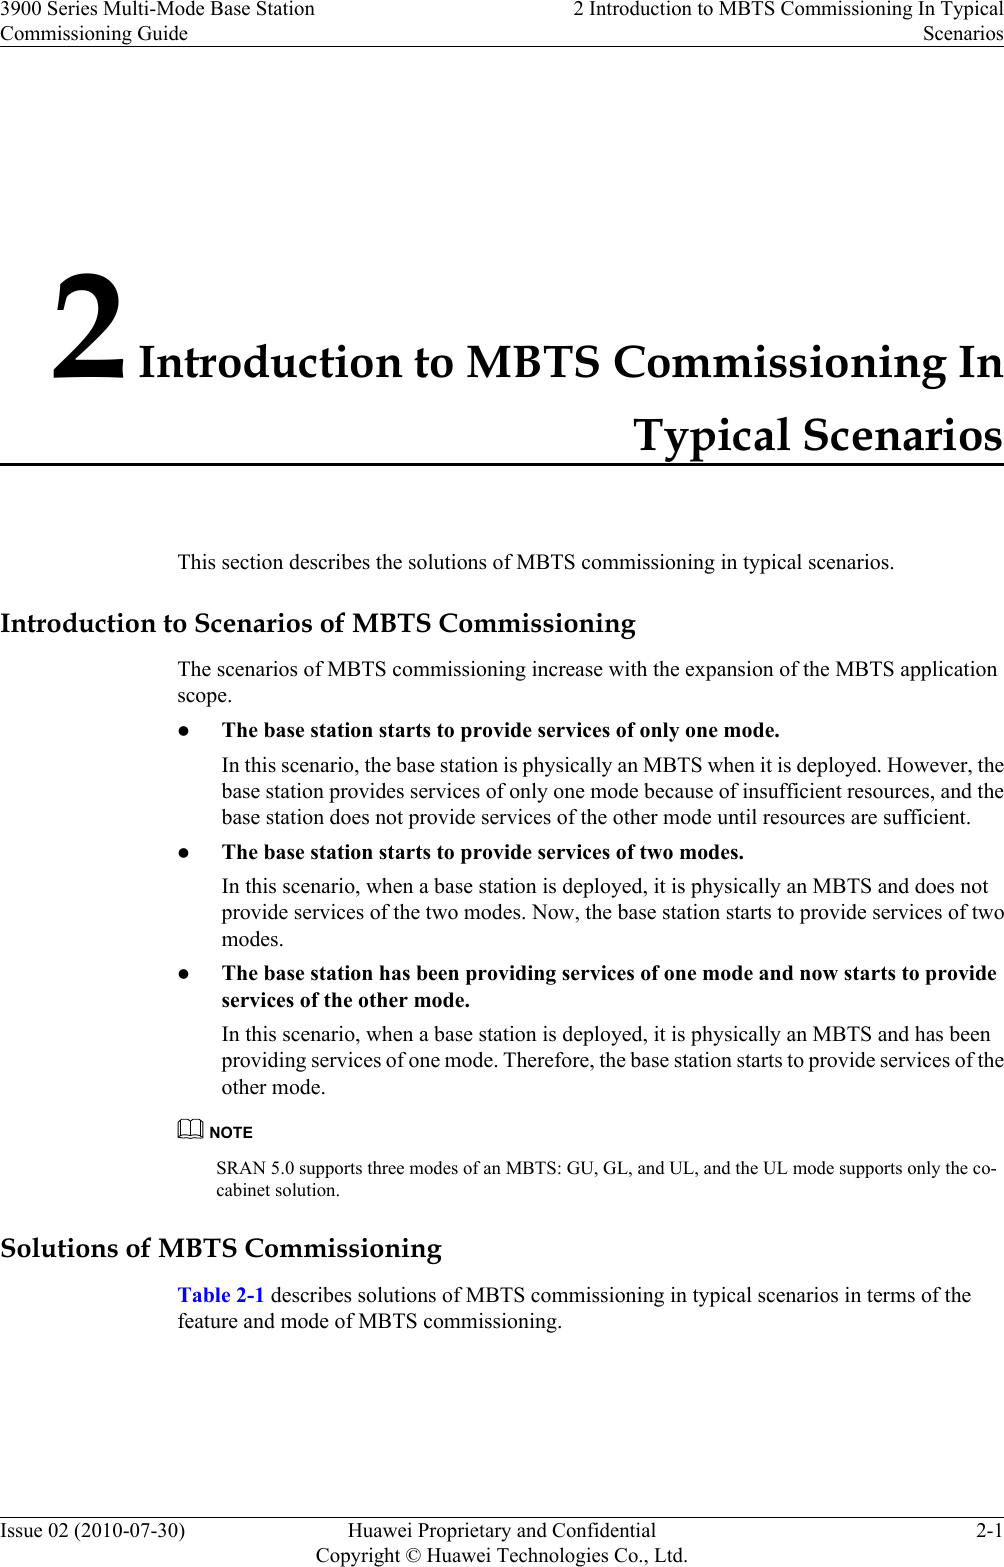 2 Introduction to MBTS Commissioning InTypical ScenariosThis section describes the solutions of MBTS commissioning in typical scenarios.Introduction to Scenarios of MBTS CommissioningThe scenarios of MBTS commissioning increase with the expansion of the MBTS applicationscope.lThe base station starts to provide services of only one mode.In this scenario, the base station is physically an MBTS when it is deployed. However, thebase station provides services of only one mode because of insufficient resources, and thebase station does not provide services of the other mode until resources are sufficient.lThe base station starts to provide services of two modes.In this scenario, when a base station is deployed, it is physically an MBTS and does notprovide services of the two modes. Now, the base station starts to provide services of twomodes.lThe base station has been providing services of one mode and now starts to provideservices of the other mode.In this scenario, when a base station is deployed, it is physically an MBTS and has beenproviding services of one mode. Therefore, the base station starts to provide services of theother mode.NOTESRAN 5.0 supports three modes of an MBTS: GU, GL, and UL, and the UL mode supports only the co-cabinet solution.Solutions of MBTS CommissioningTable 2-1 describes solutions of MBTS commissioning in typical scenarios in terms of thefeature and mode of MBTS commissioning.3900 Series Multi-Mode Base StationCommissioning Guide2 Introduction to MBTS Commissioning In TypicalScenariosIssue 02 (2010-07-30) Huawei Proprietary and ConfidentialCopyright © Huawei Technologies Co., Ltd.2-1